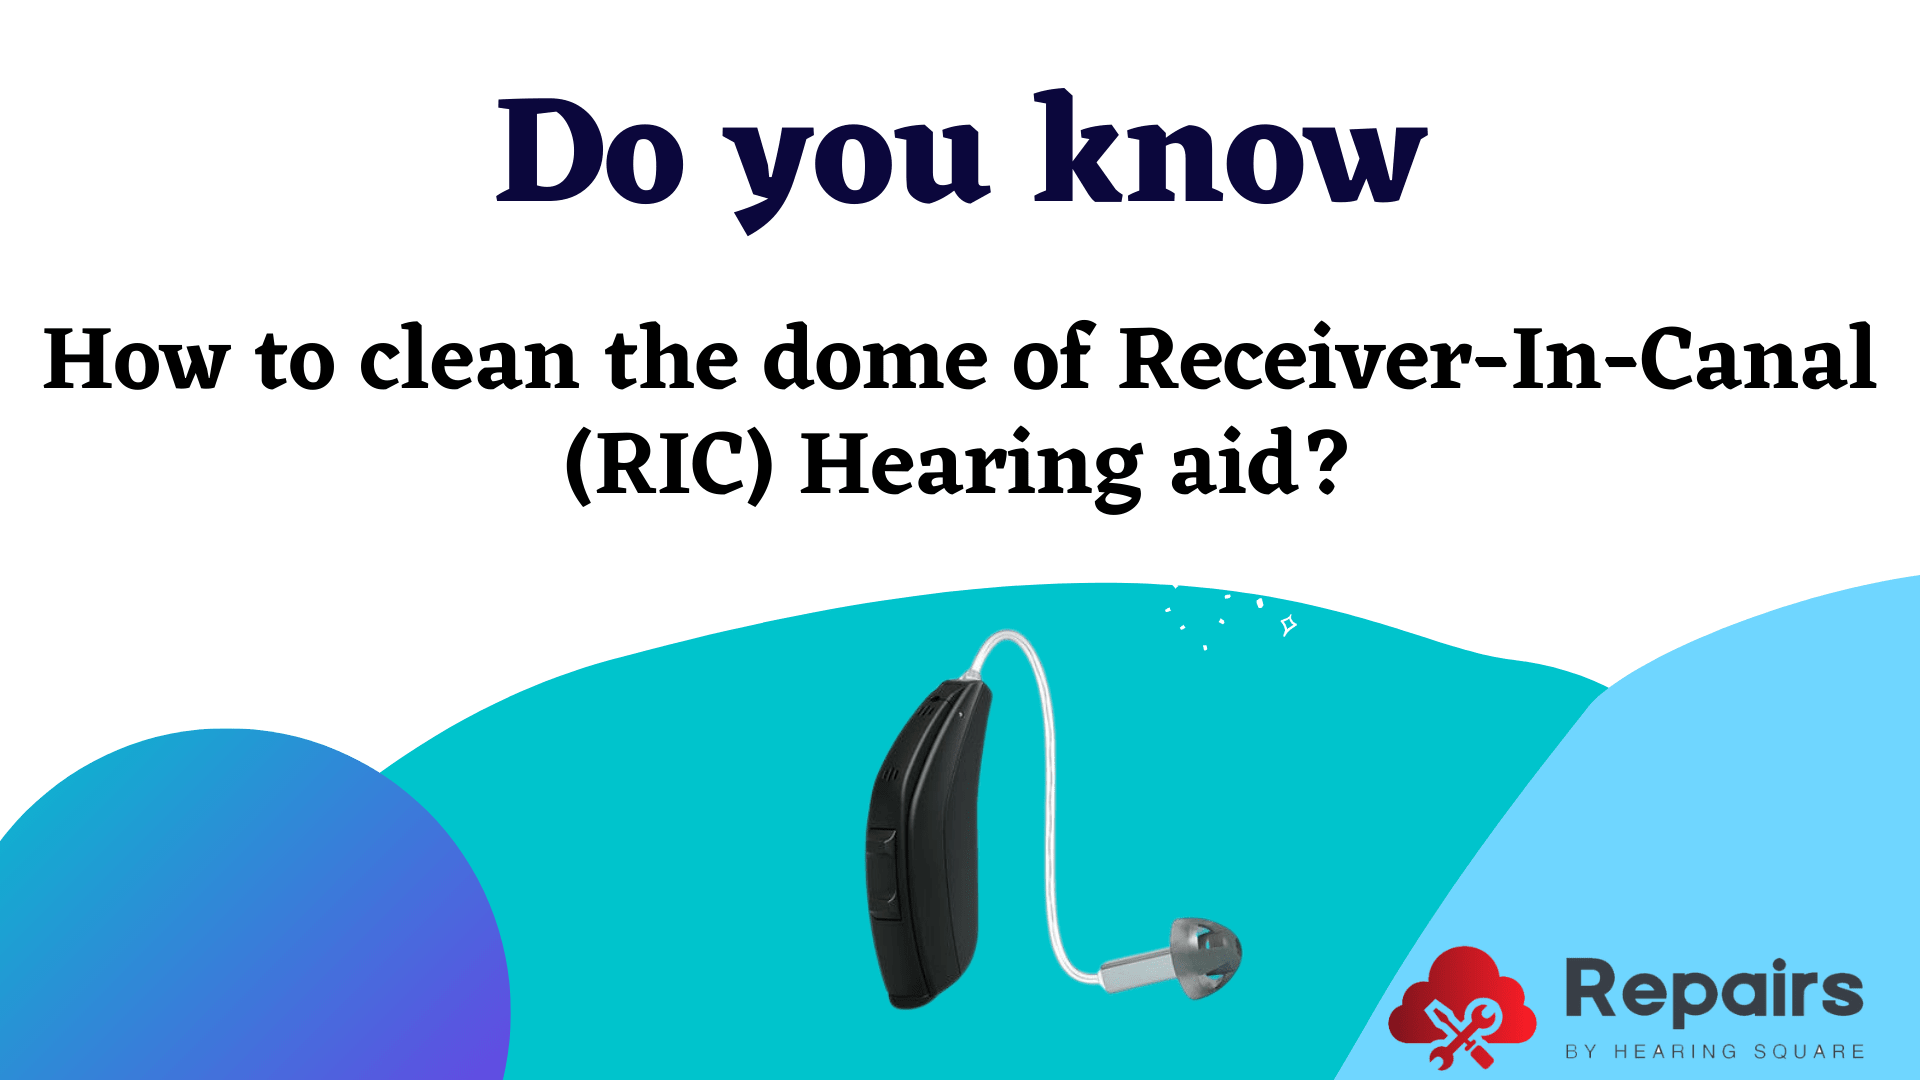 How to clean the dome of Receiver-In-Canal (RIC) Hearing aid